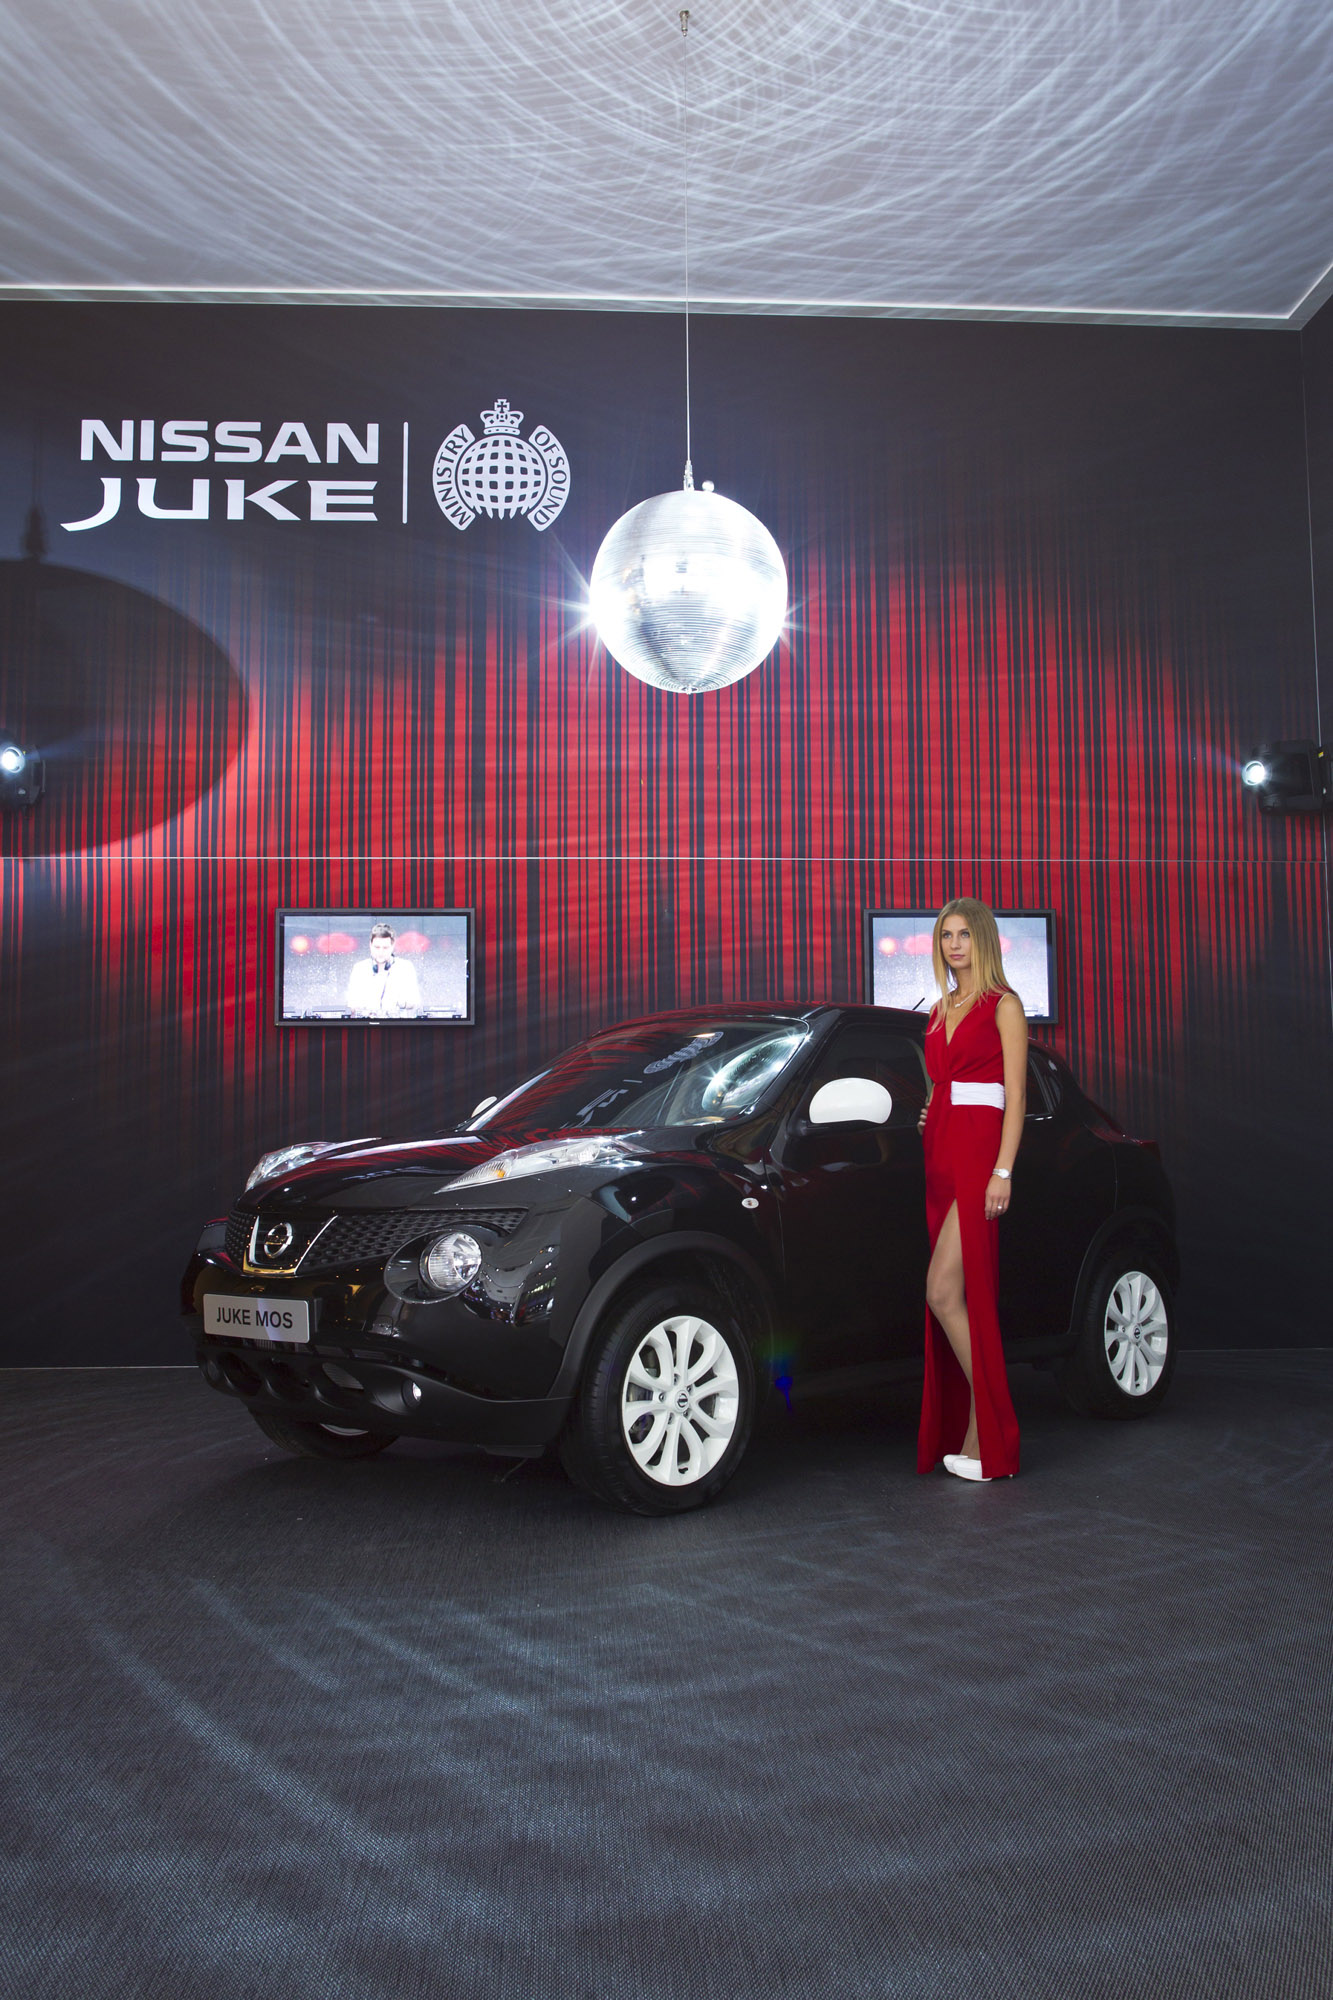 Nissan Juke Ministry of Sound Moscow